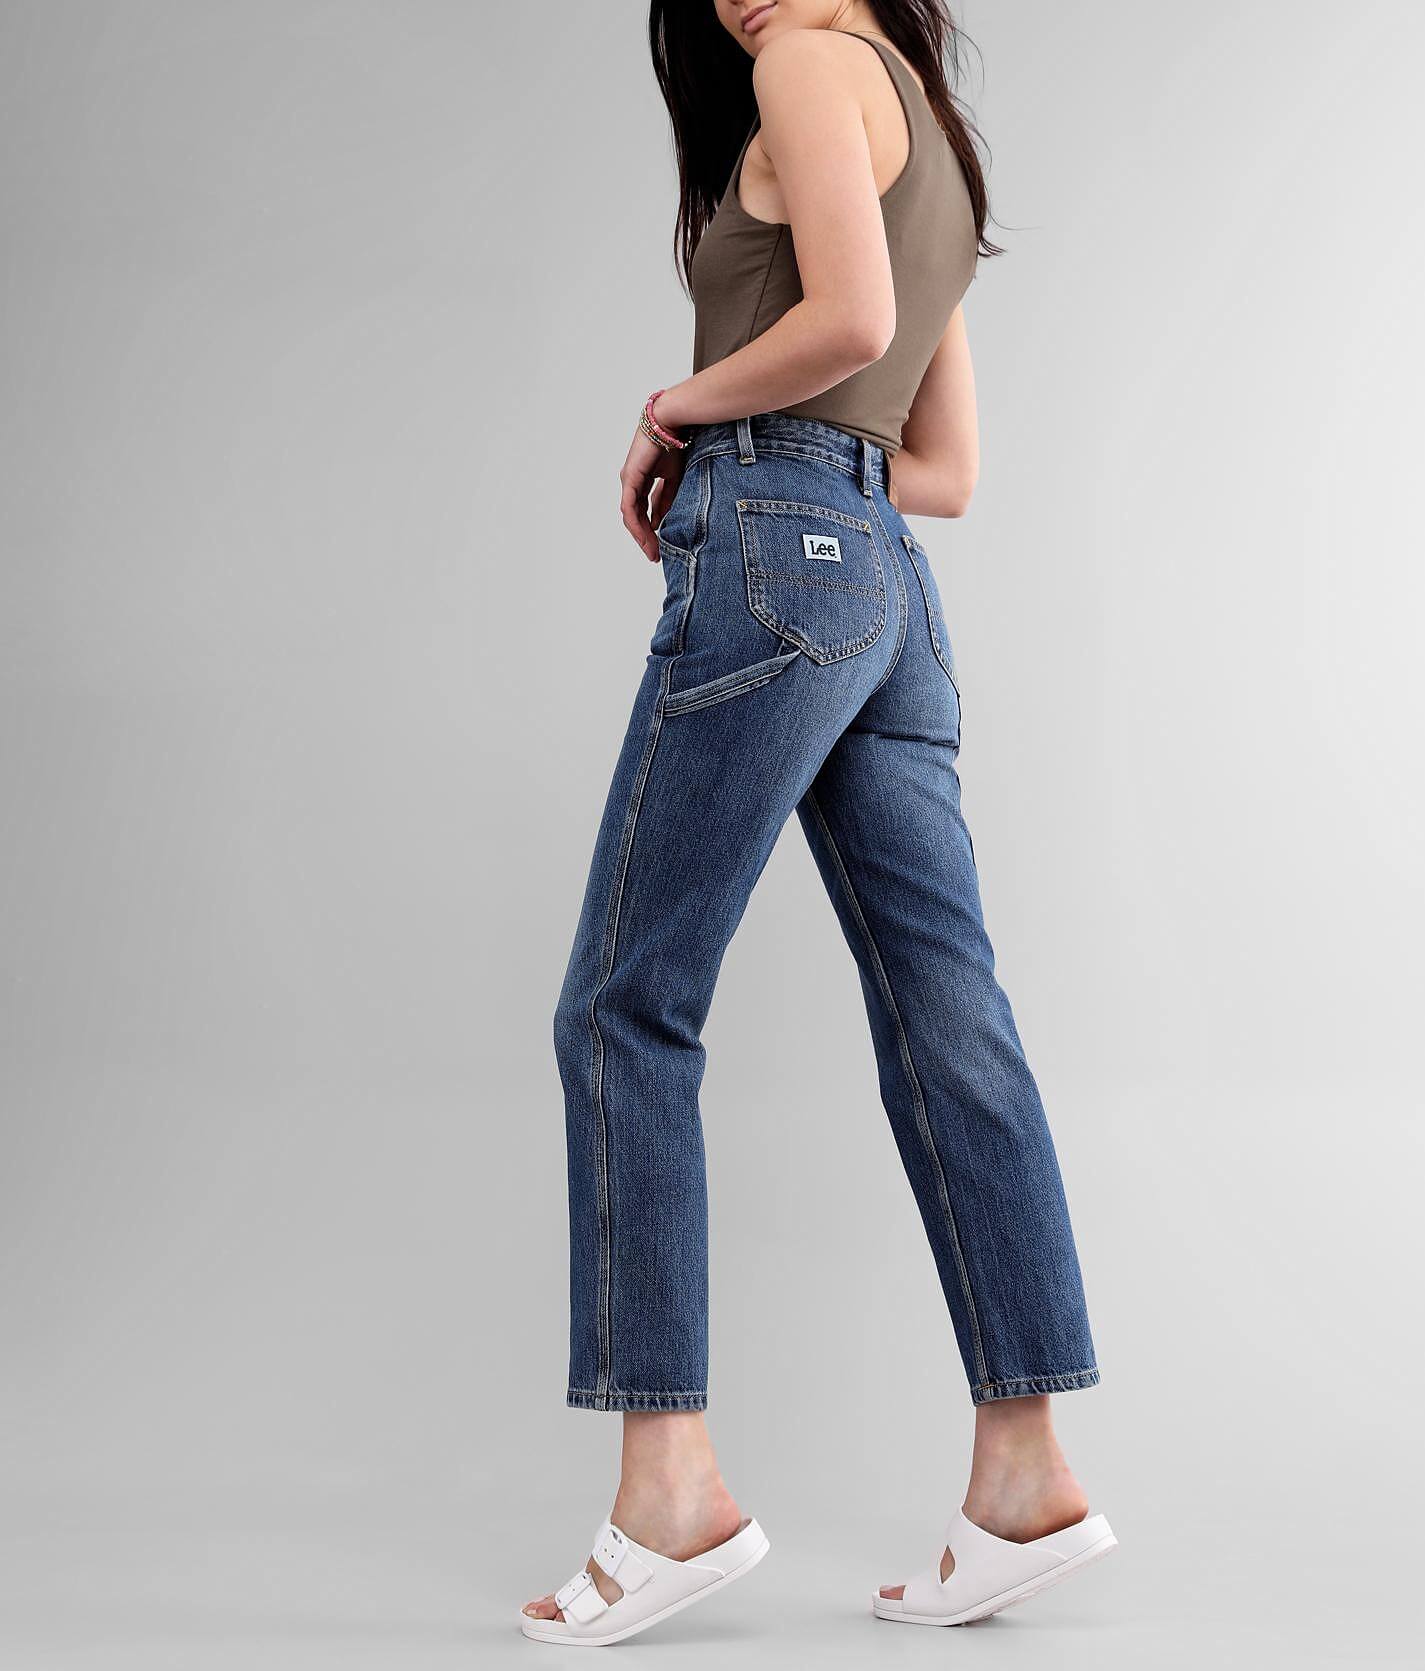 lee dungarees womens